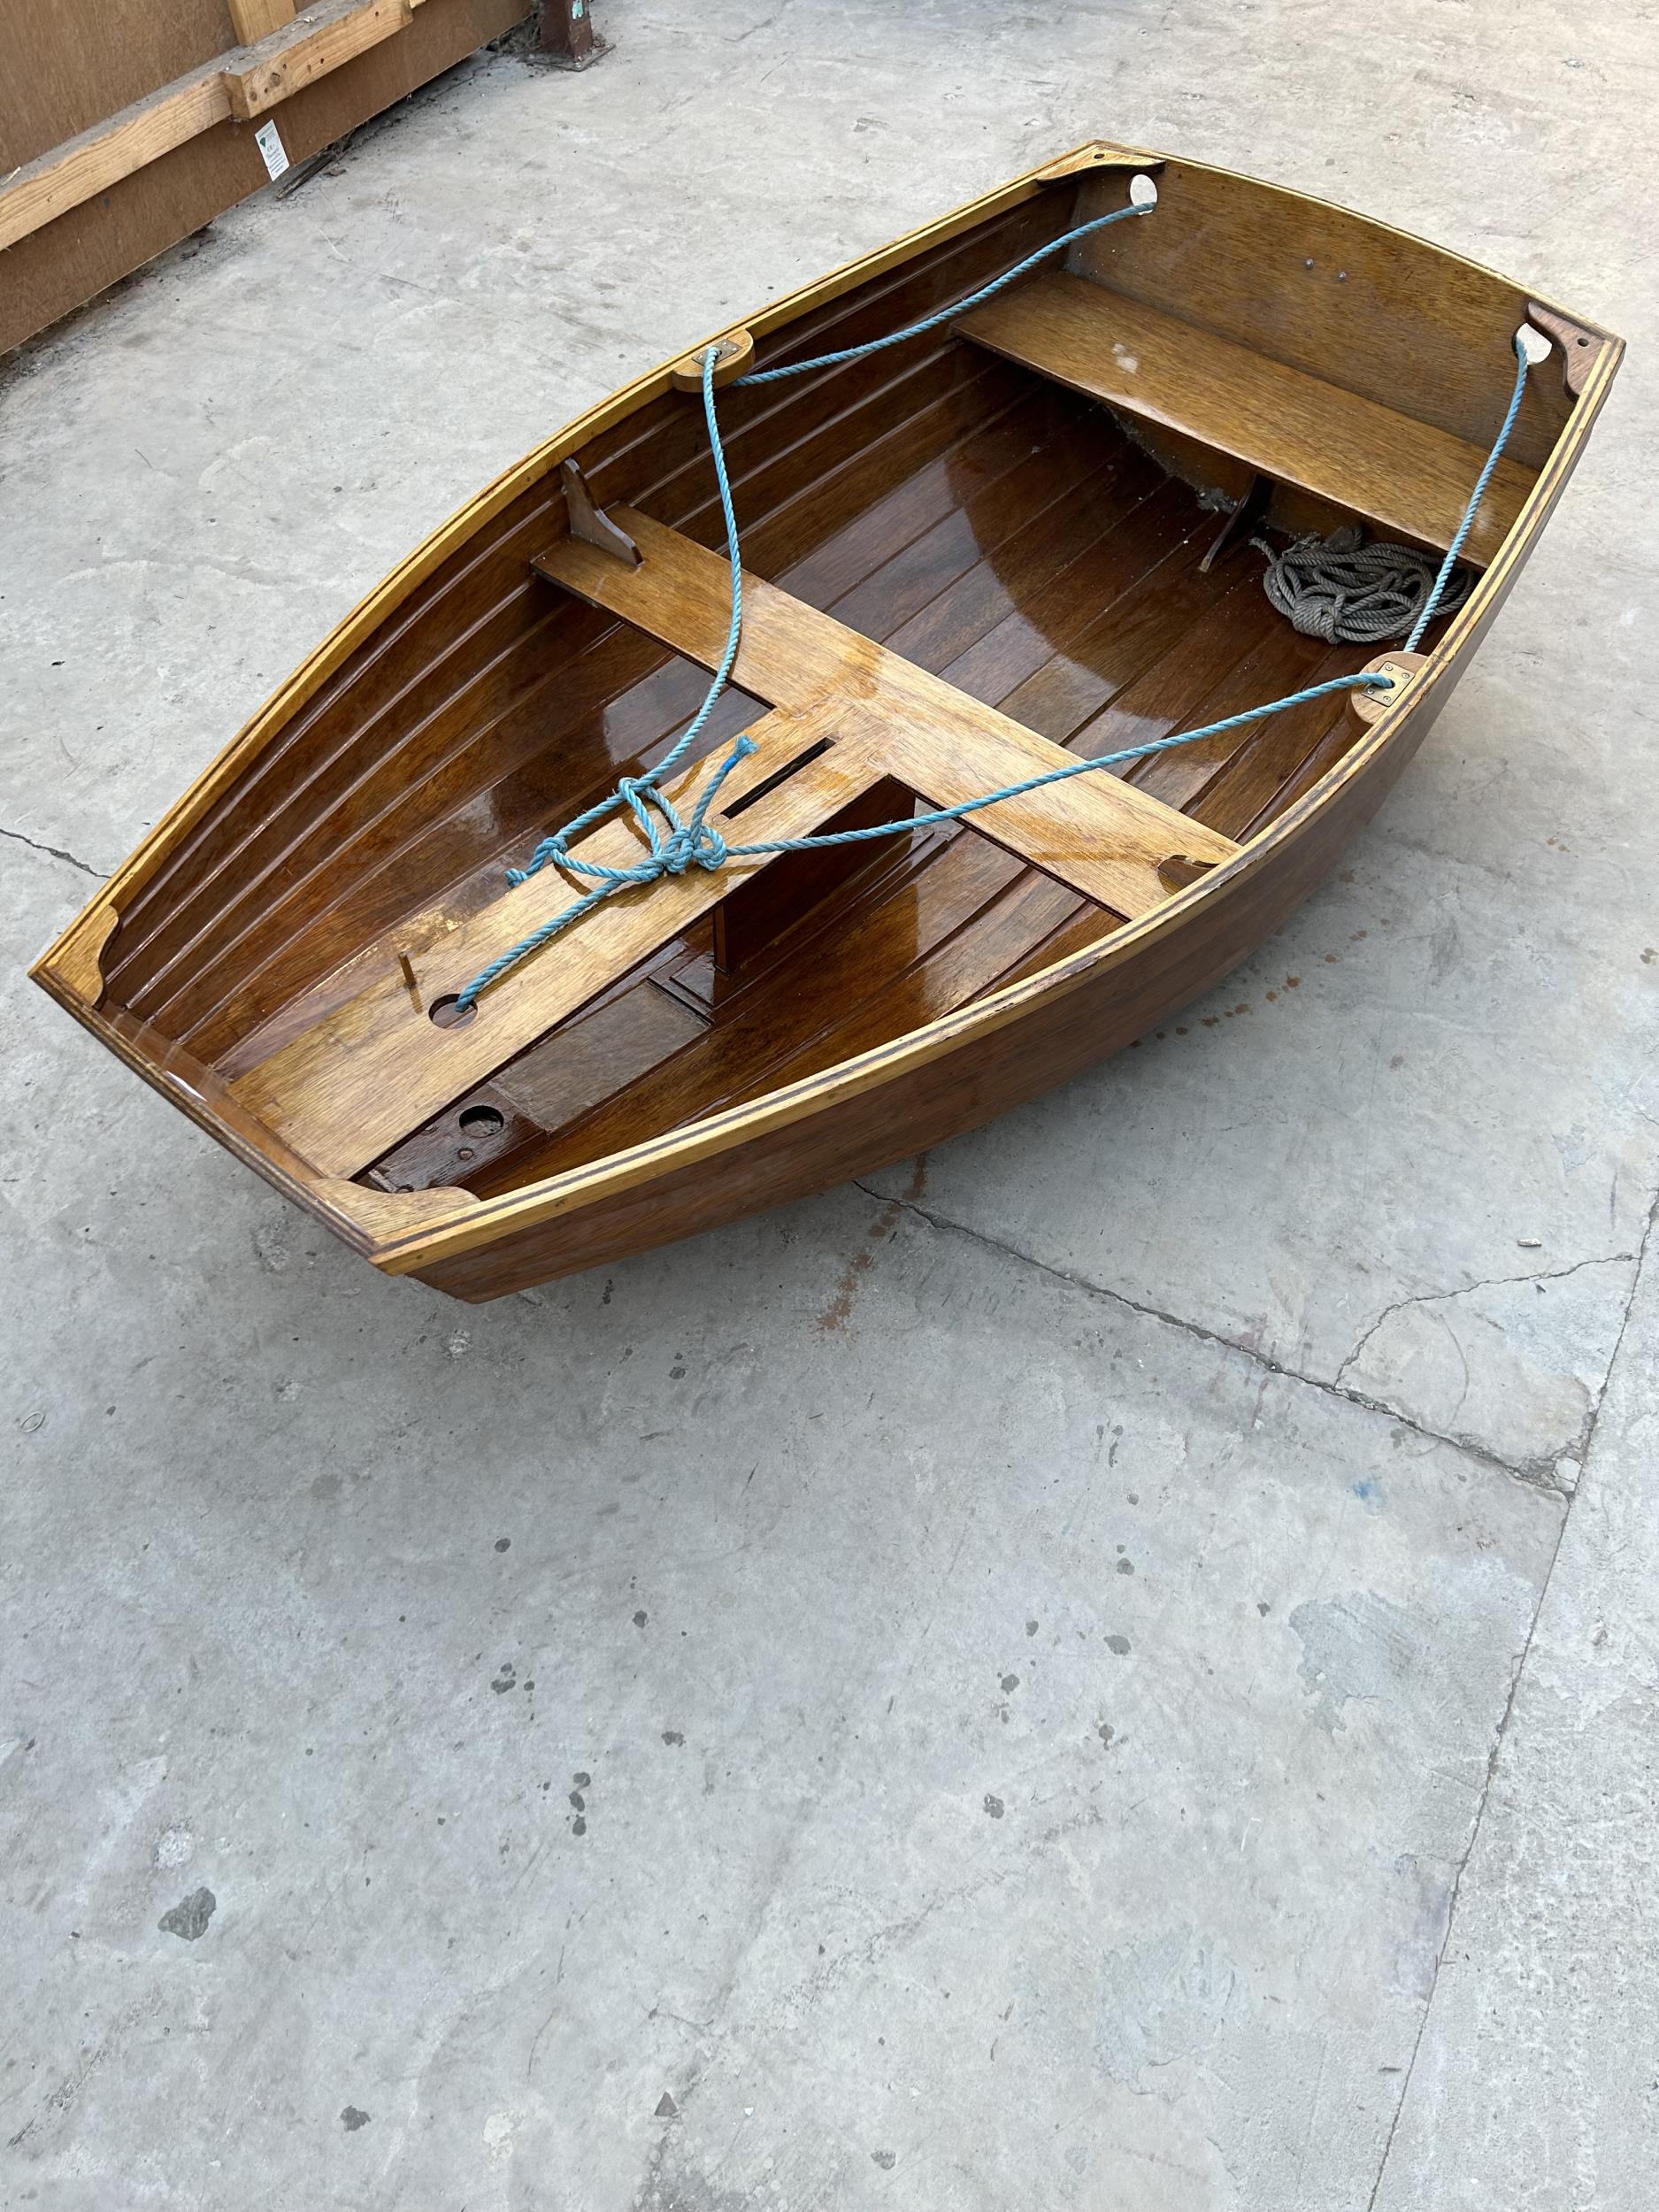 A VINTAGE HARD WOOD ROWING BOAT WITH INTERNAL SEATING (L:187CM W:107CM) - Image 5 of 6